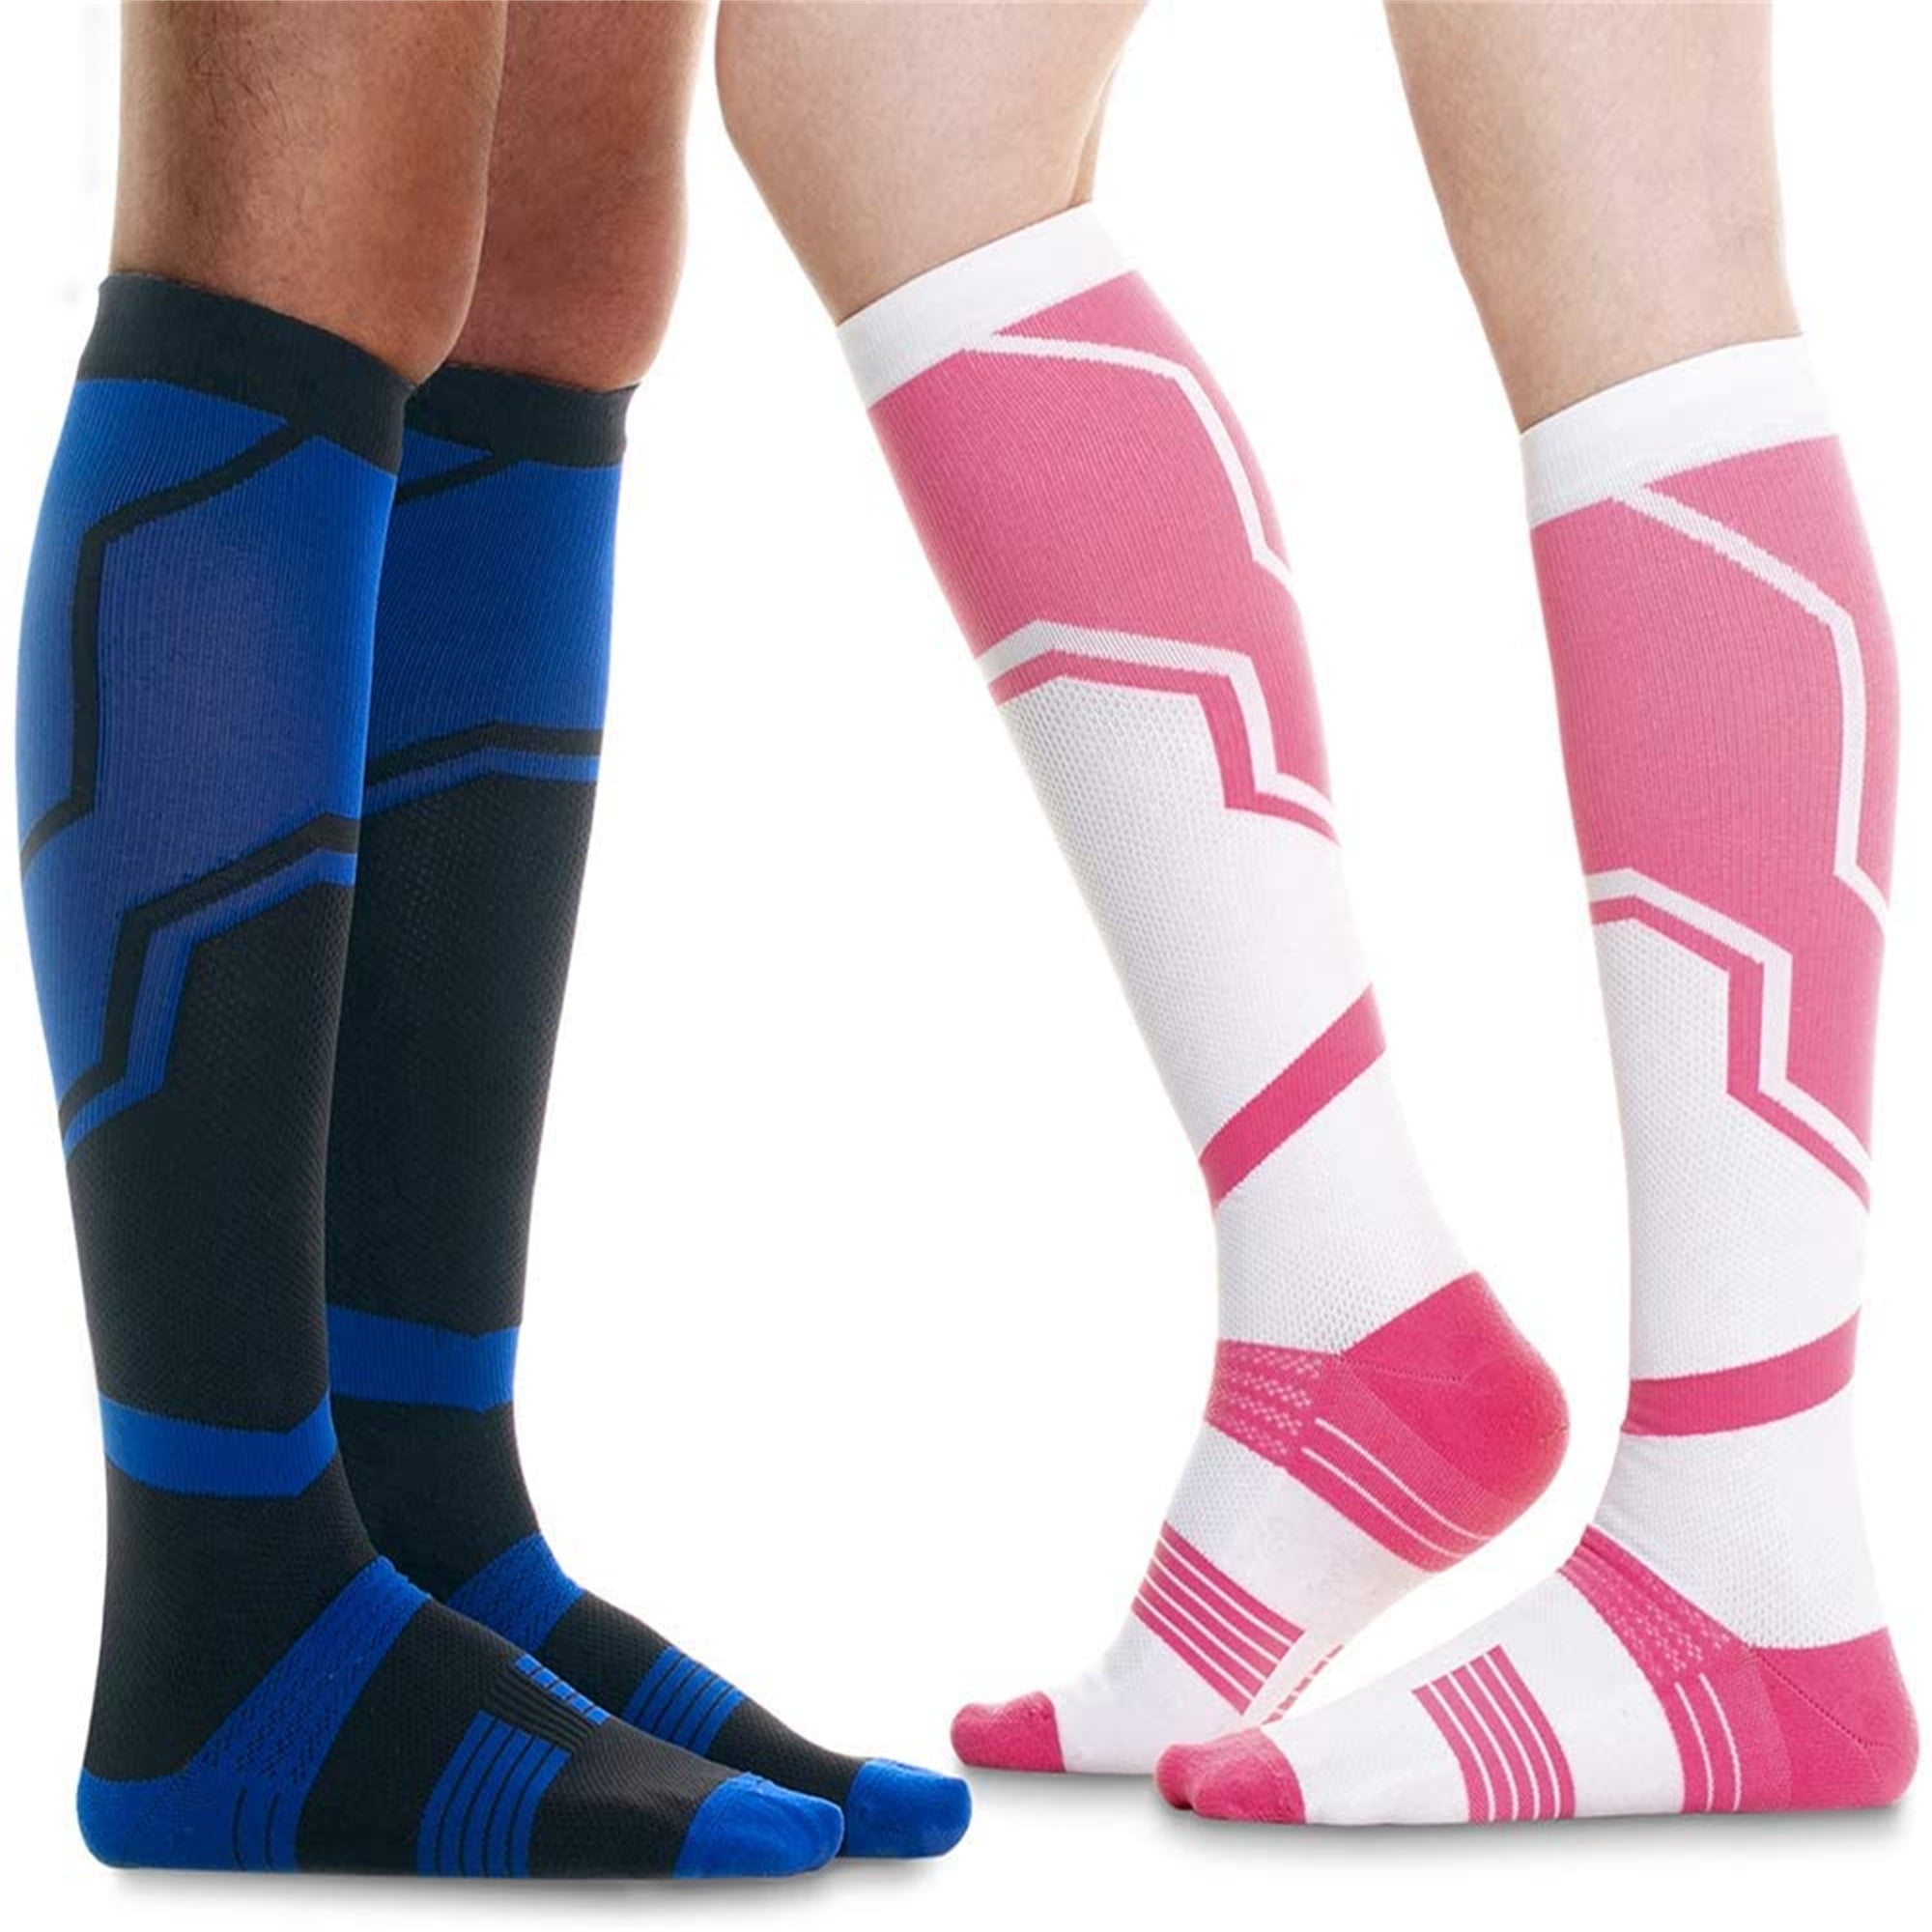 Copper Compression Socks 20-30mmHg Graduated Support Mens Women S-XXL 4 Pairs Details about    